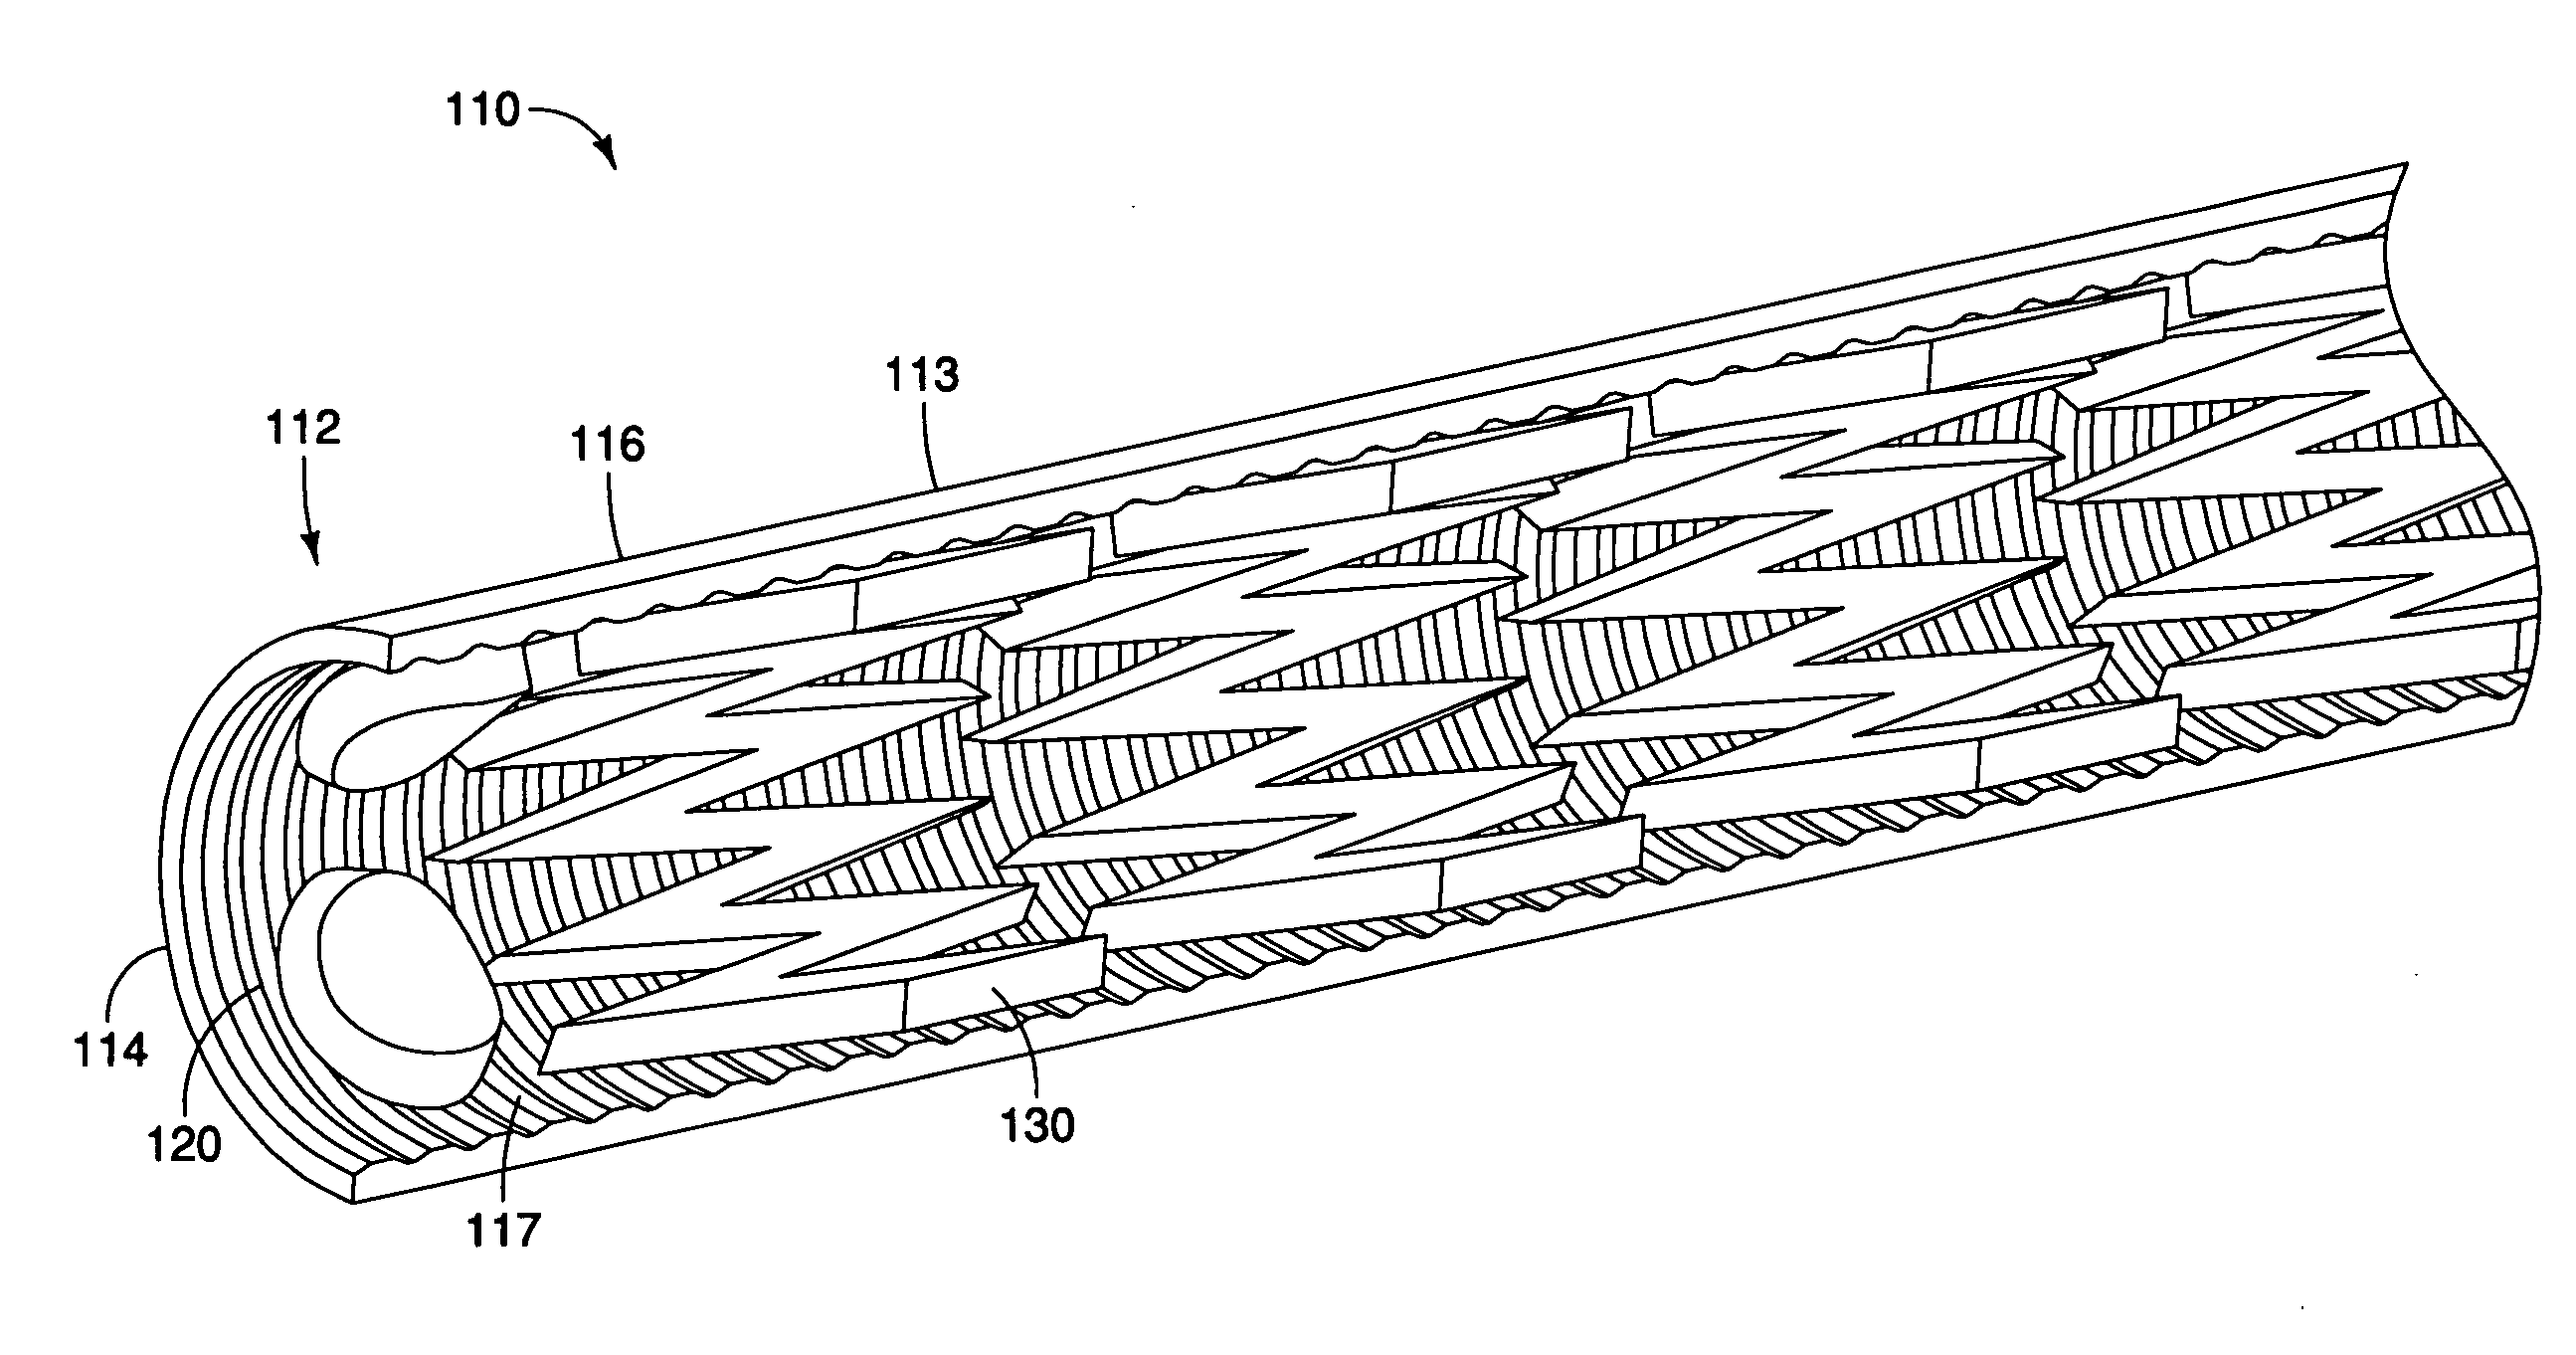 Introducer sheath and method of manufacture